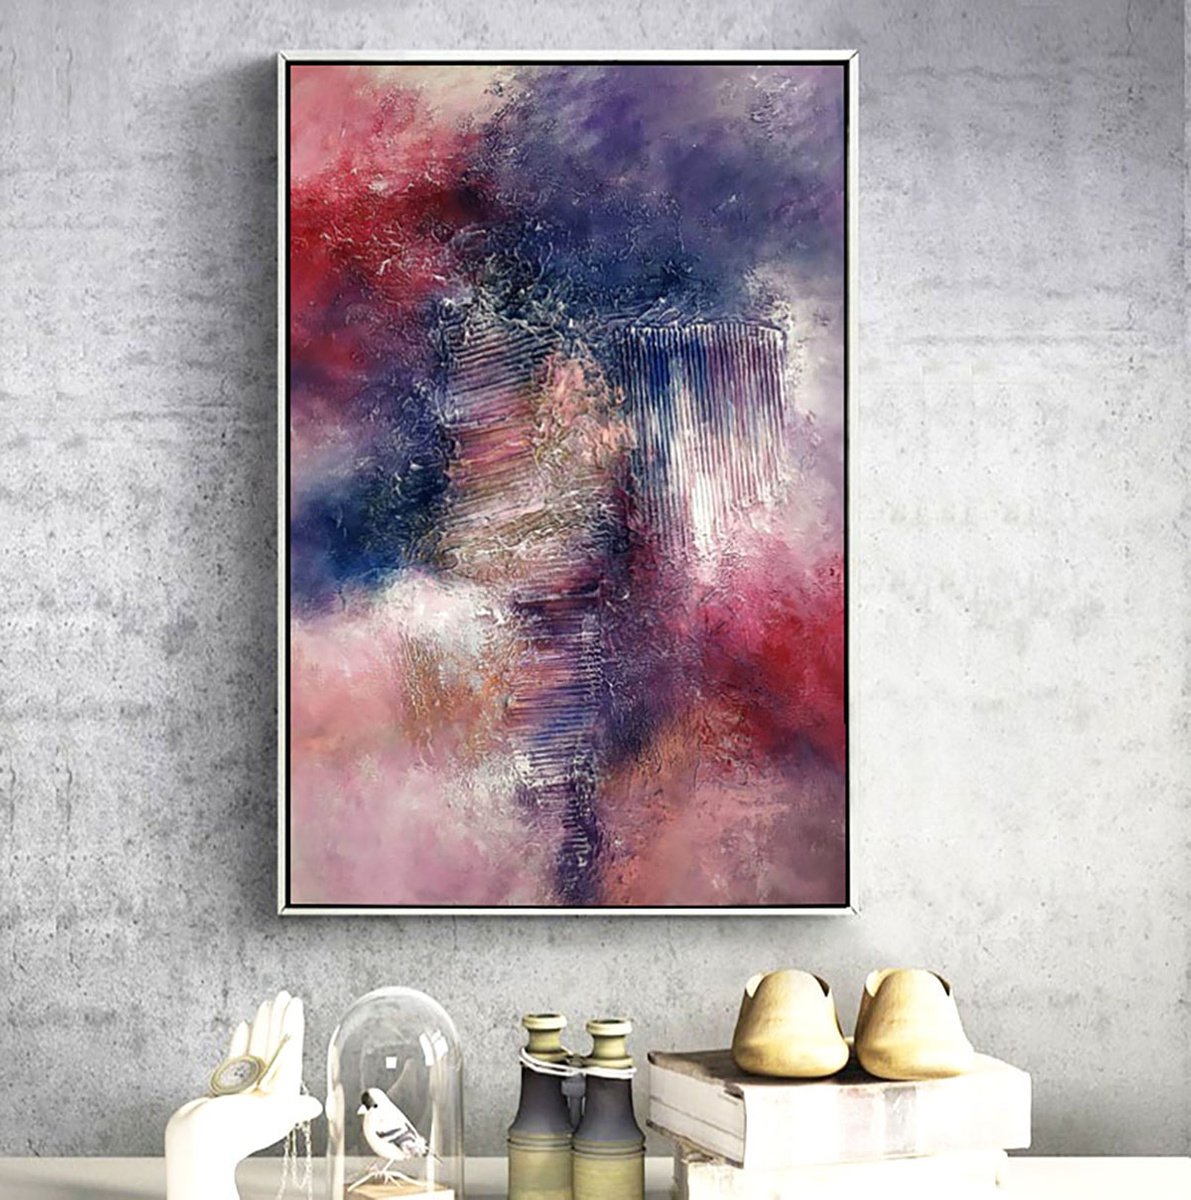 Smells like spring 70x100cm Abstract Textured Painting by Alexandra Petropoulou